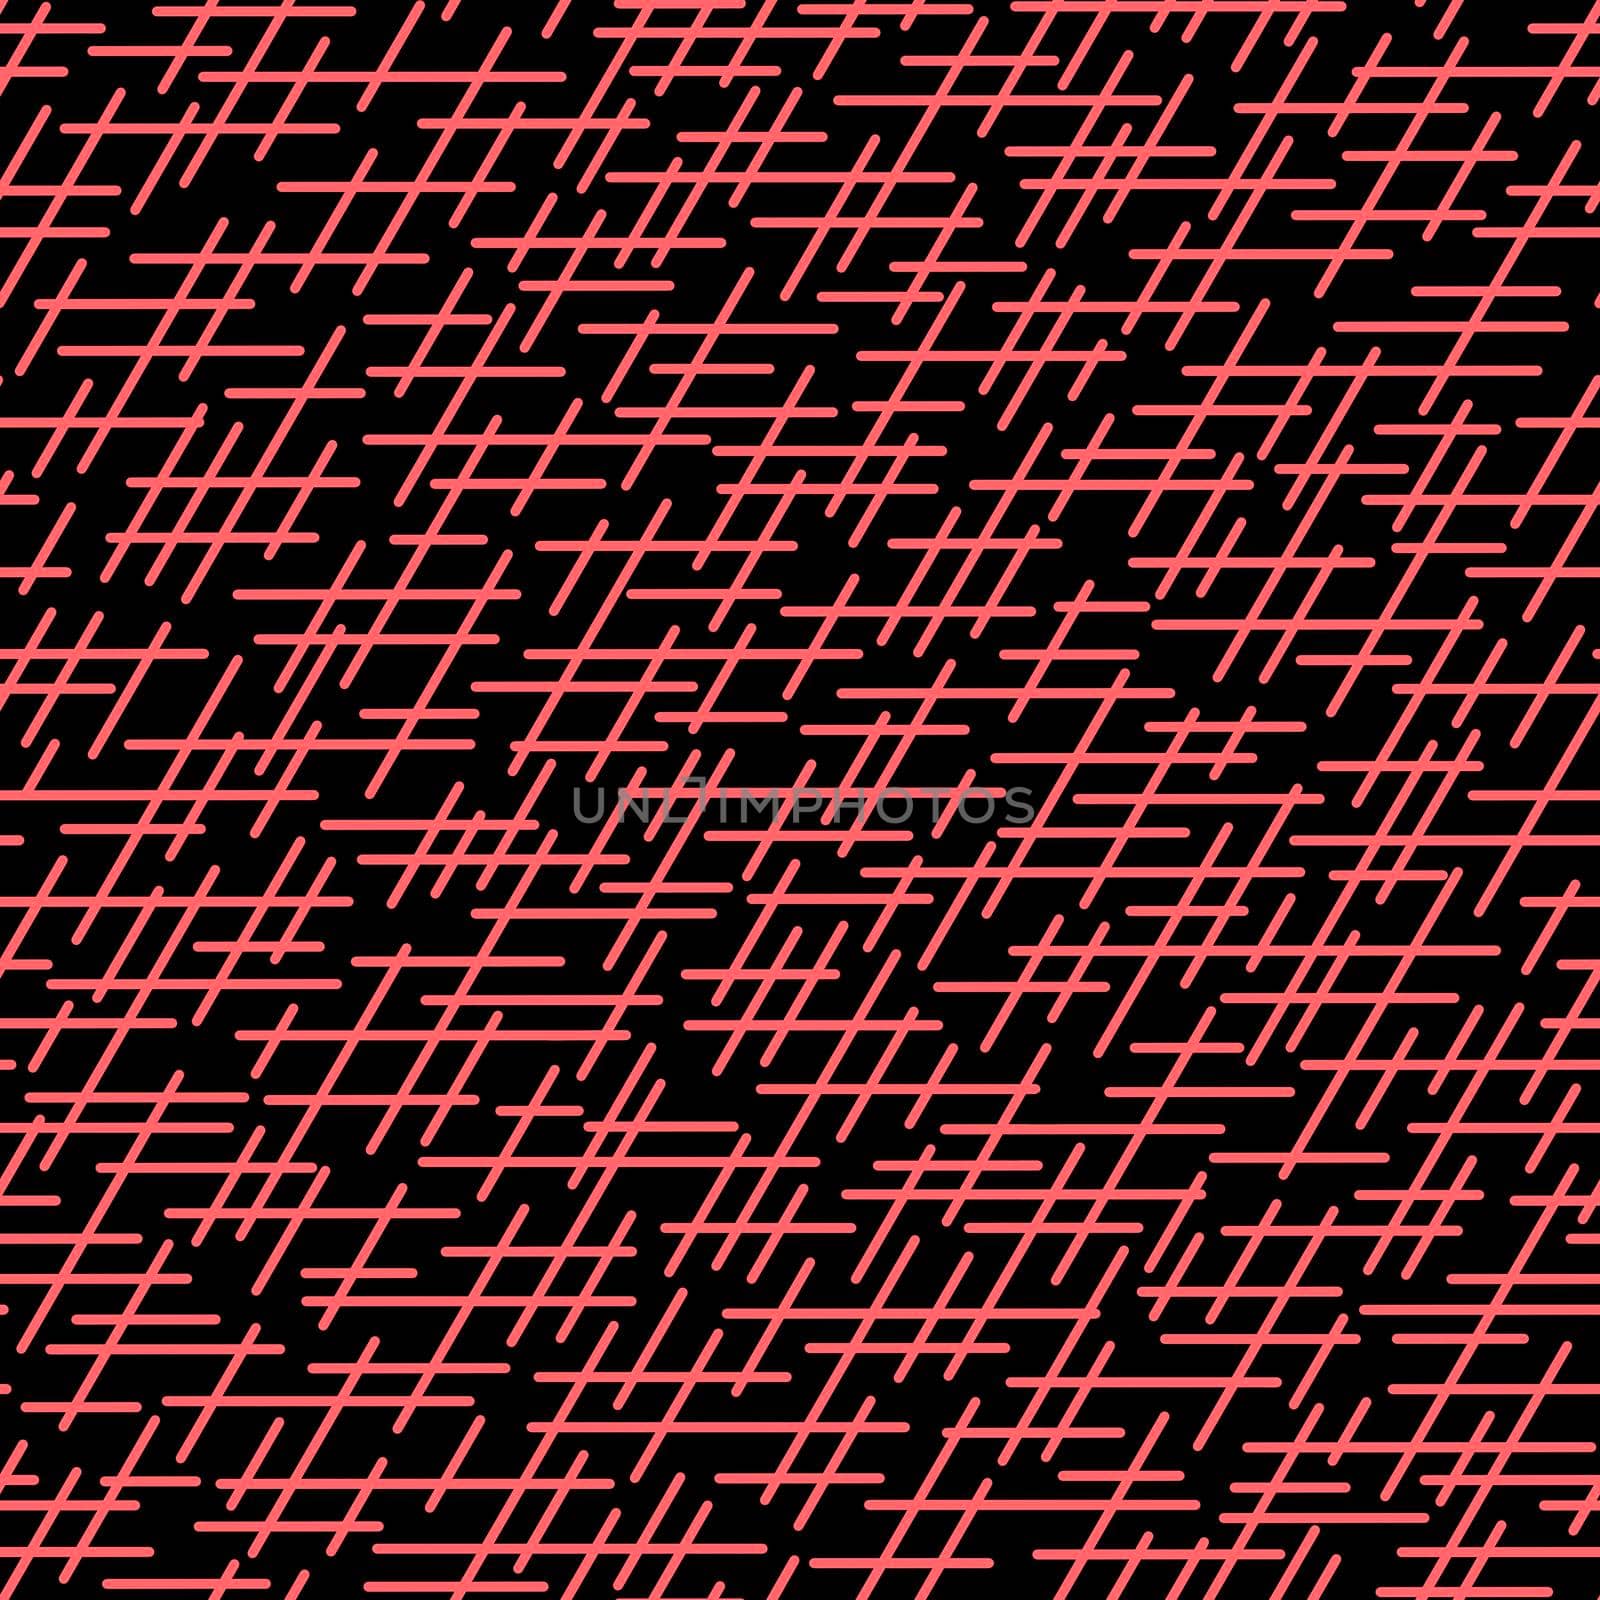 Randomly crossing lines making pattern.Chaotic short lines seamless pattern,chips and sticks modern repeatable motif.Good for print, textile,fabric, background, wrapping paper.Pink black colors.